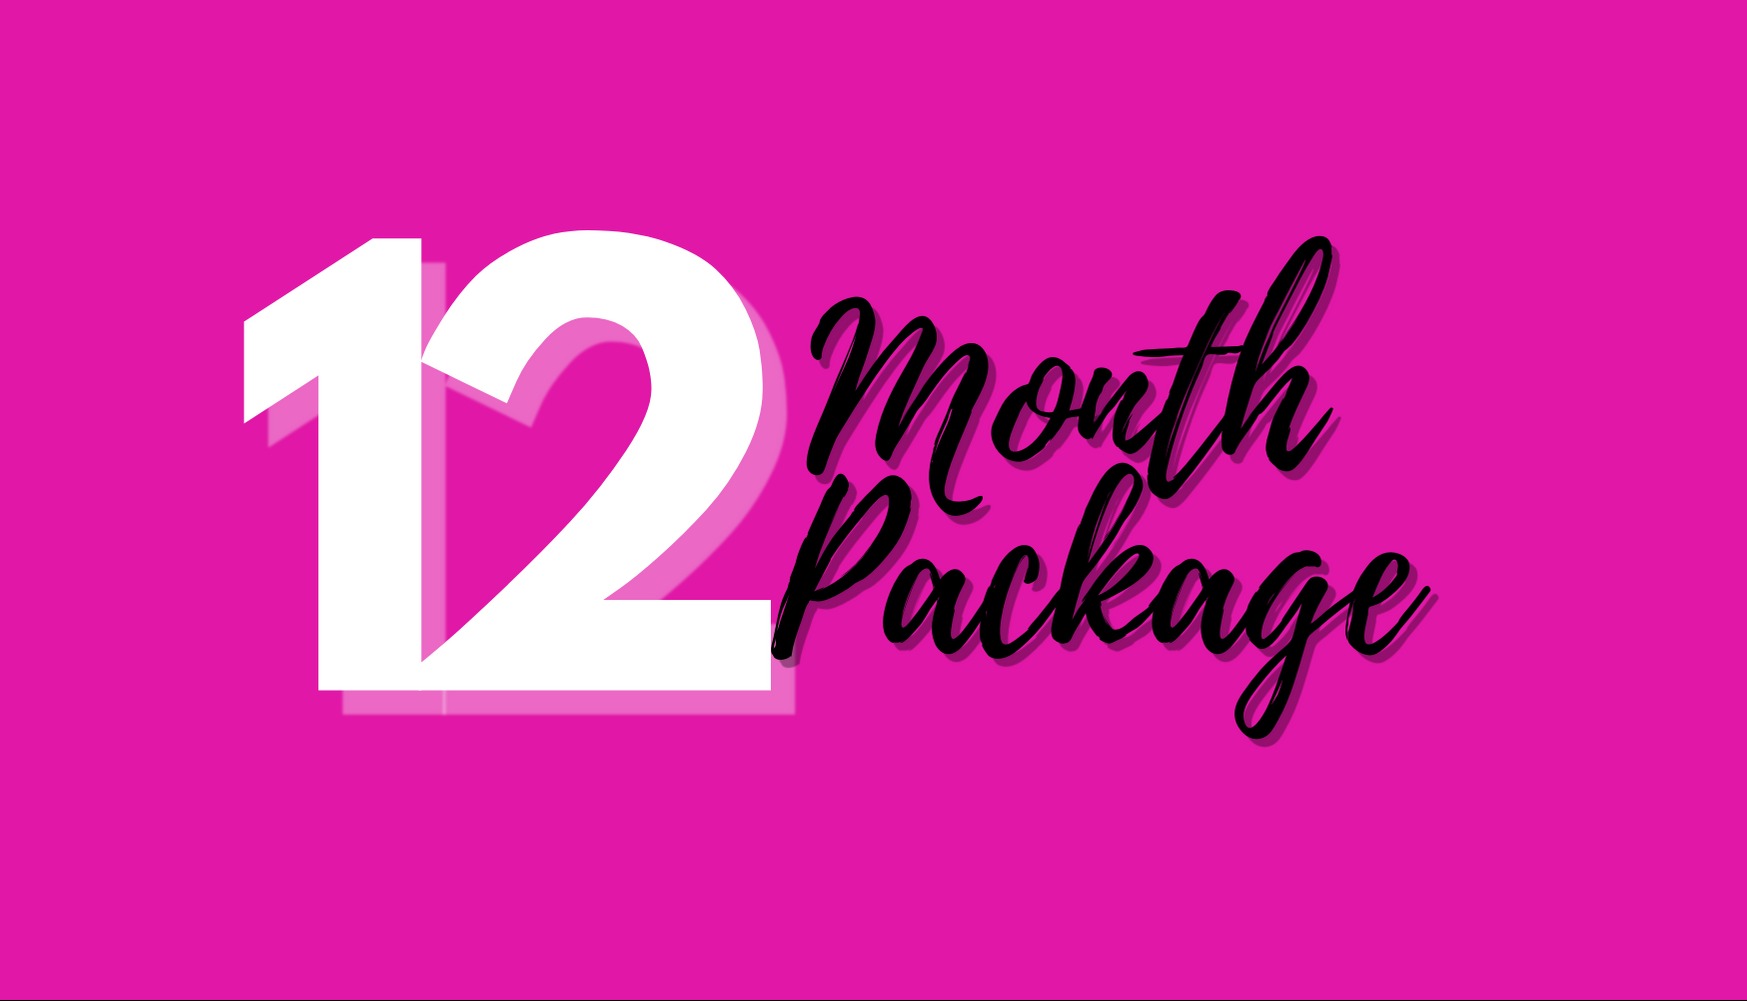 12 Month Studio Package